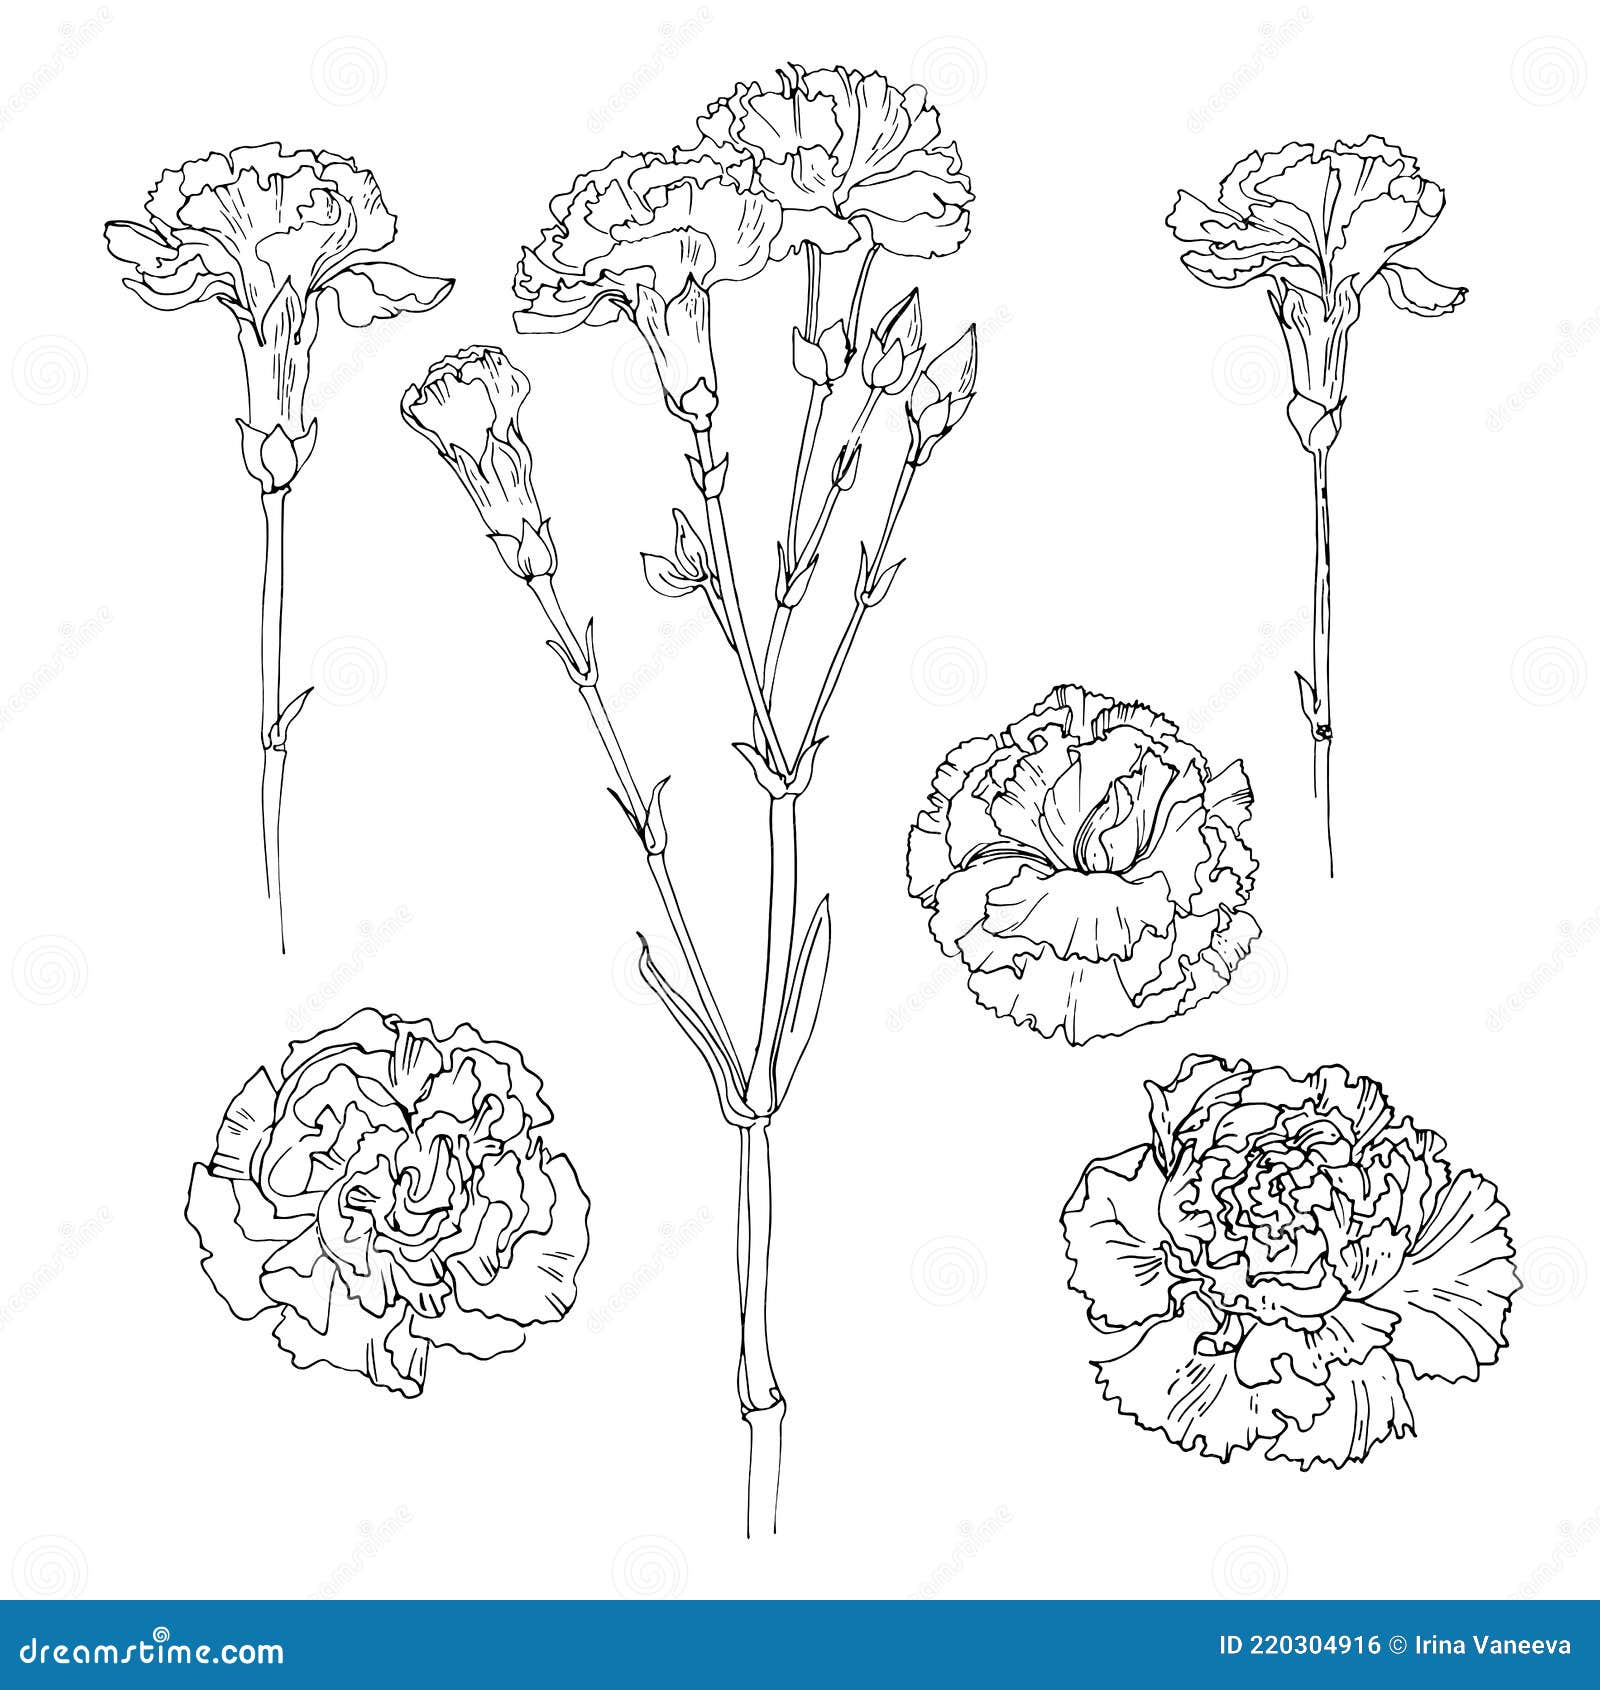 Carnation Vector Sketch of Flowers by Line on a White Background. Decor ...